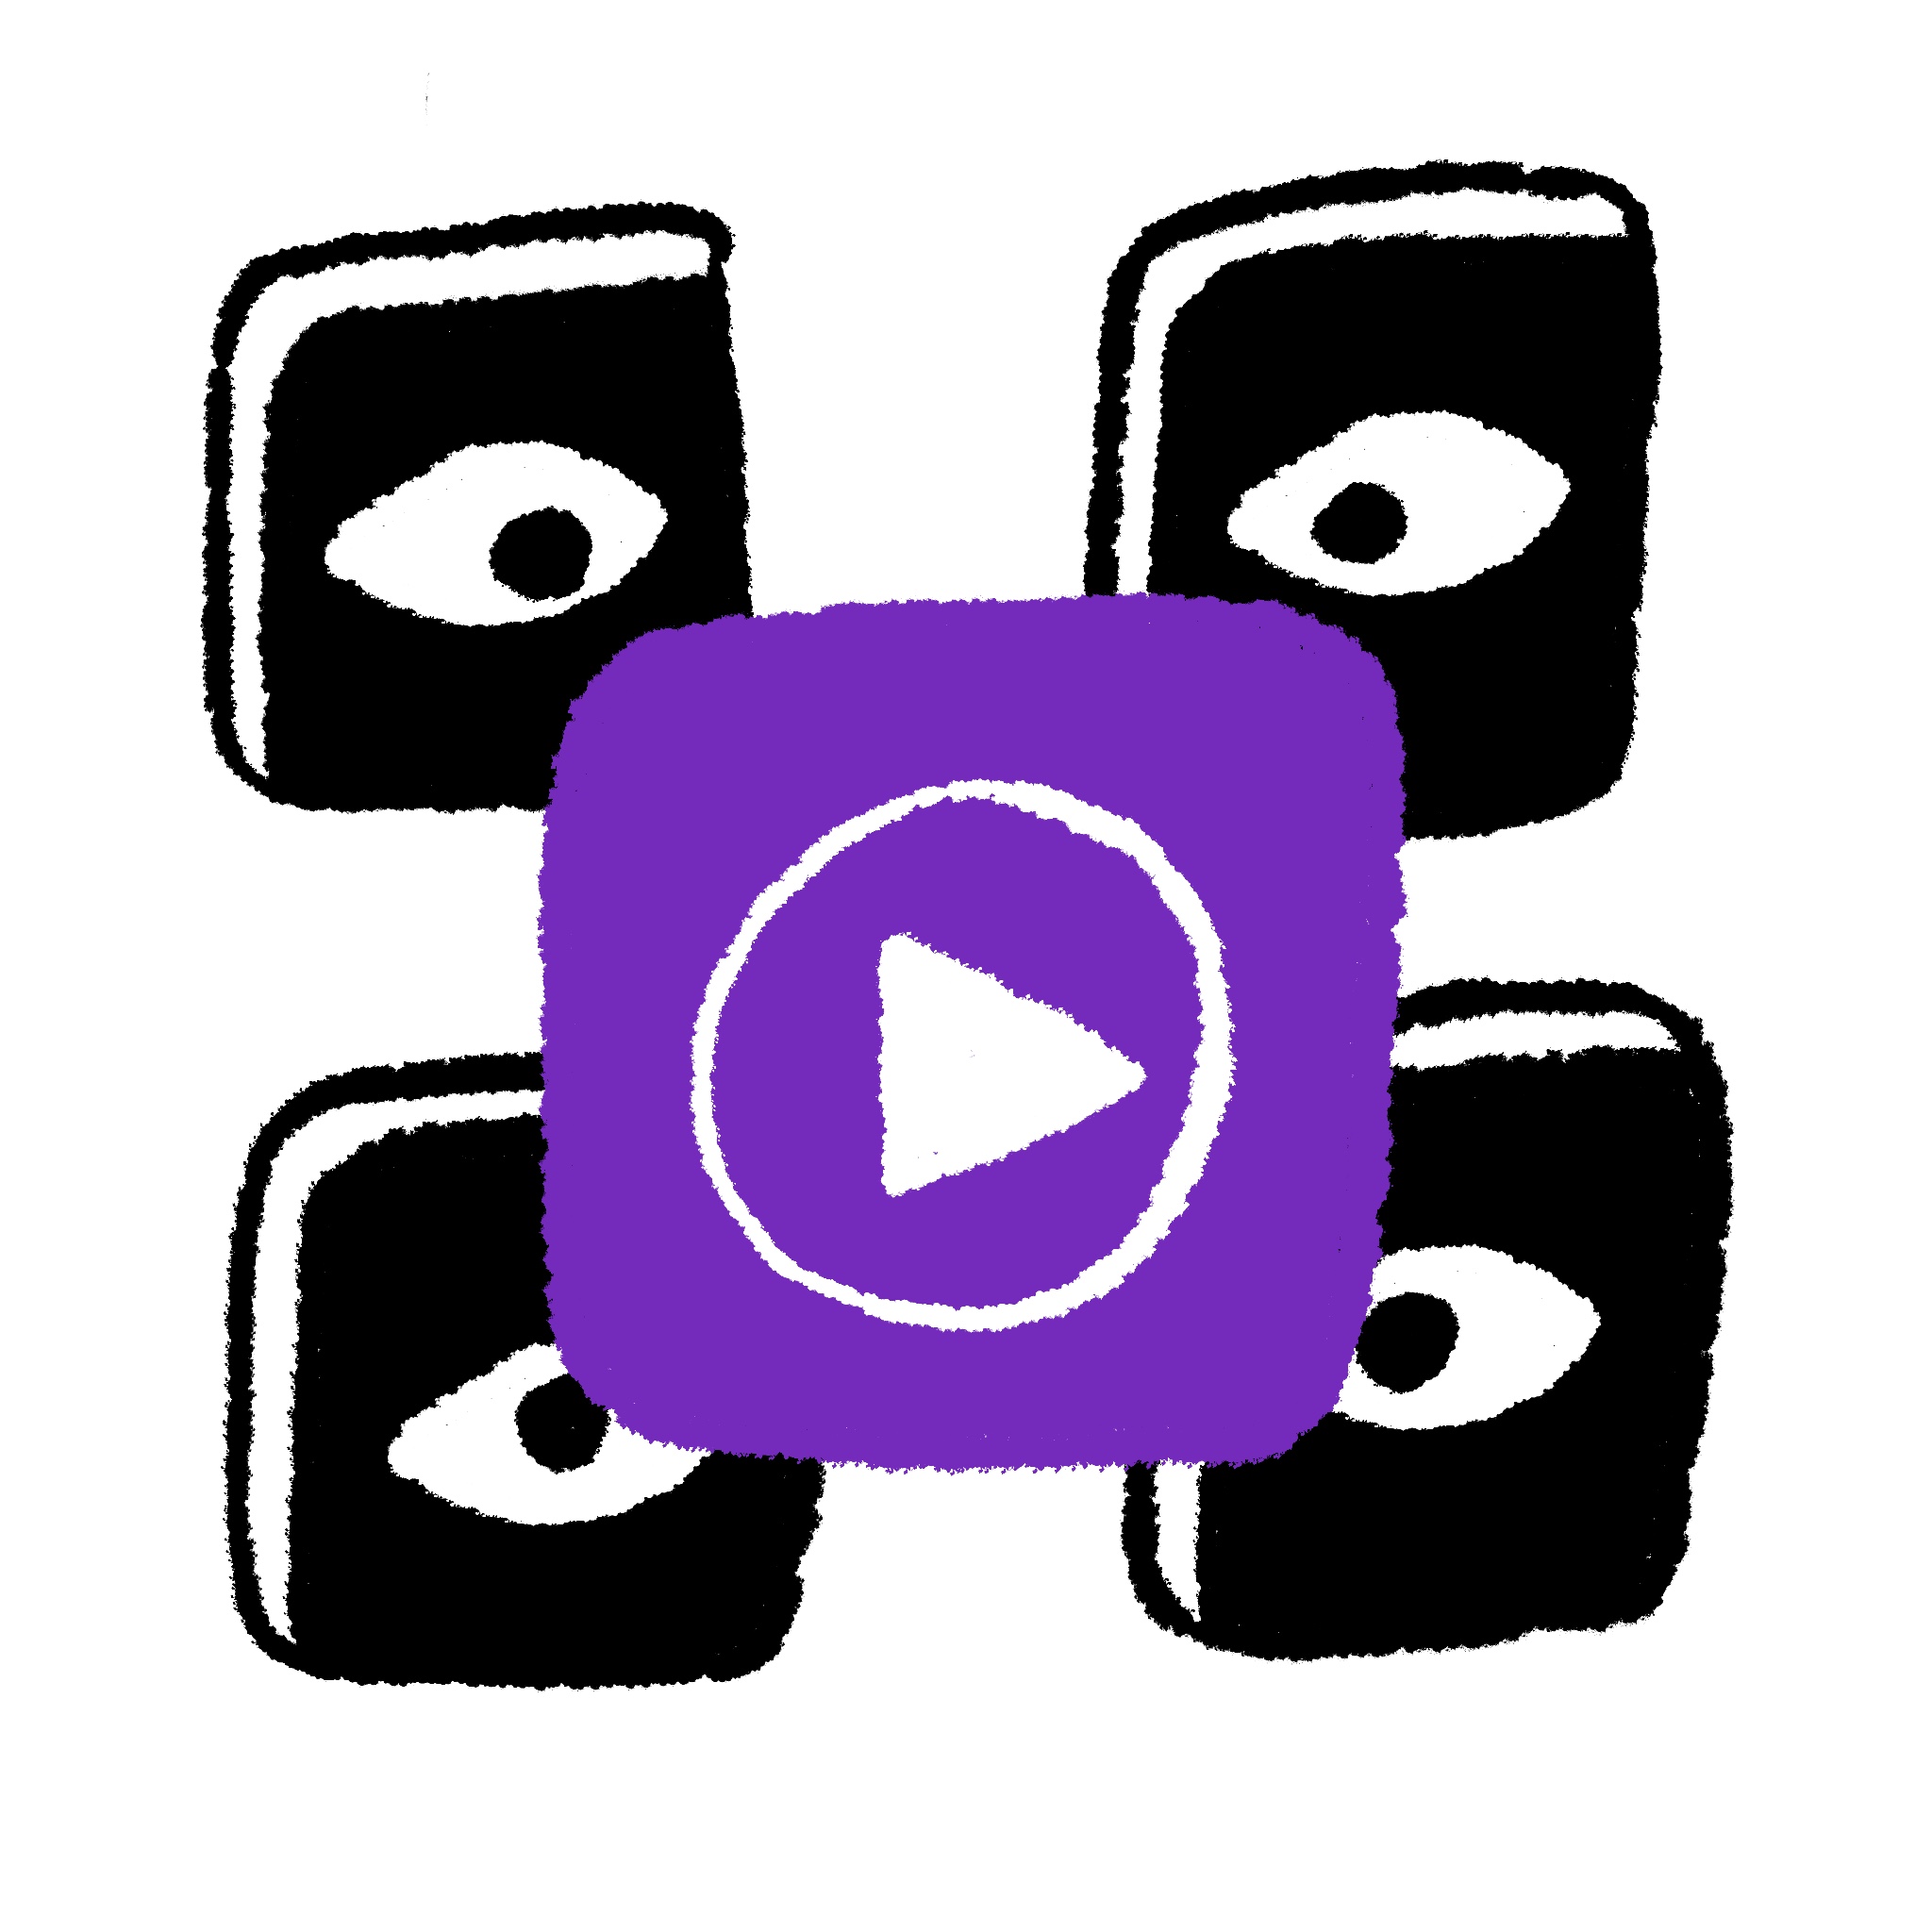 Spot illustration of a purple play icon with four holes behind it with eyes peering out of each hole